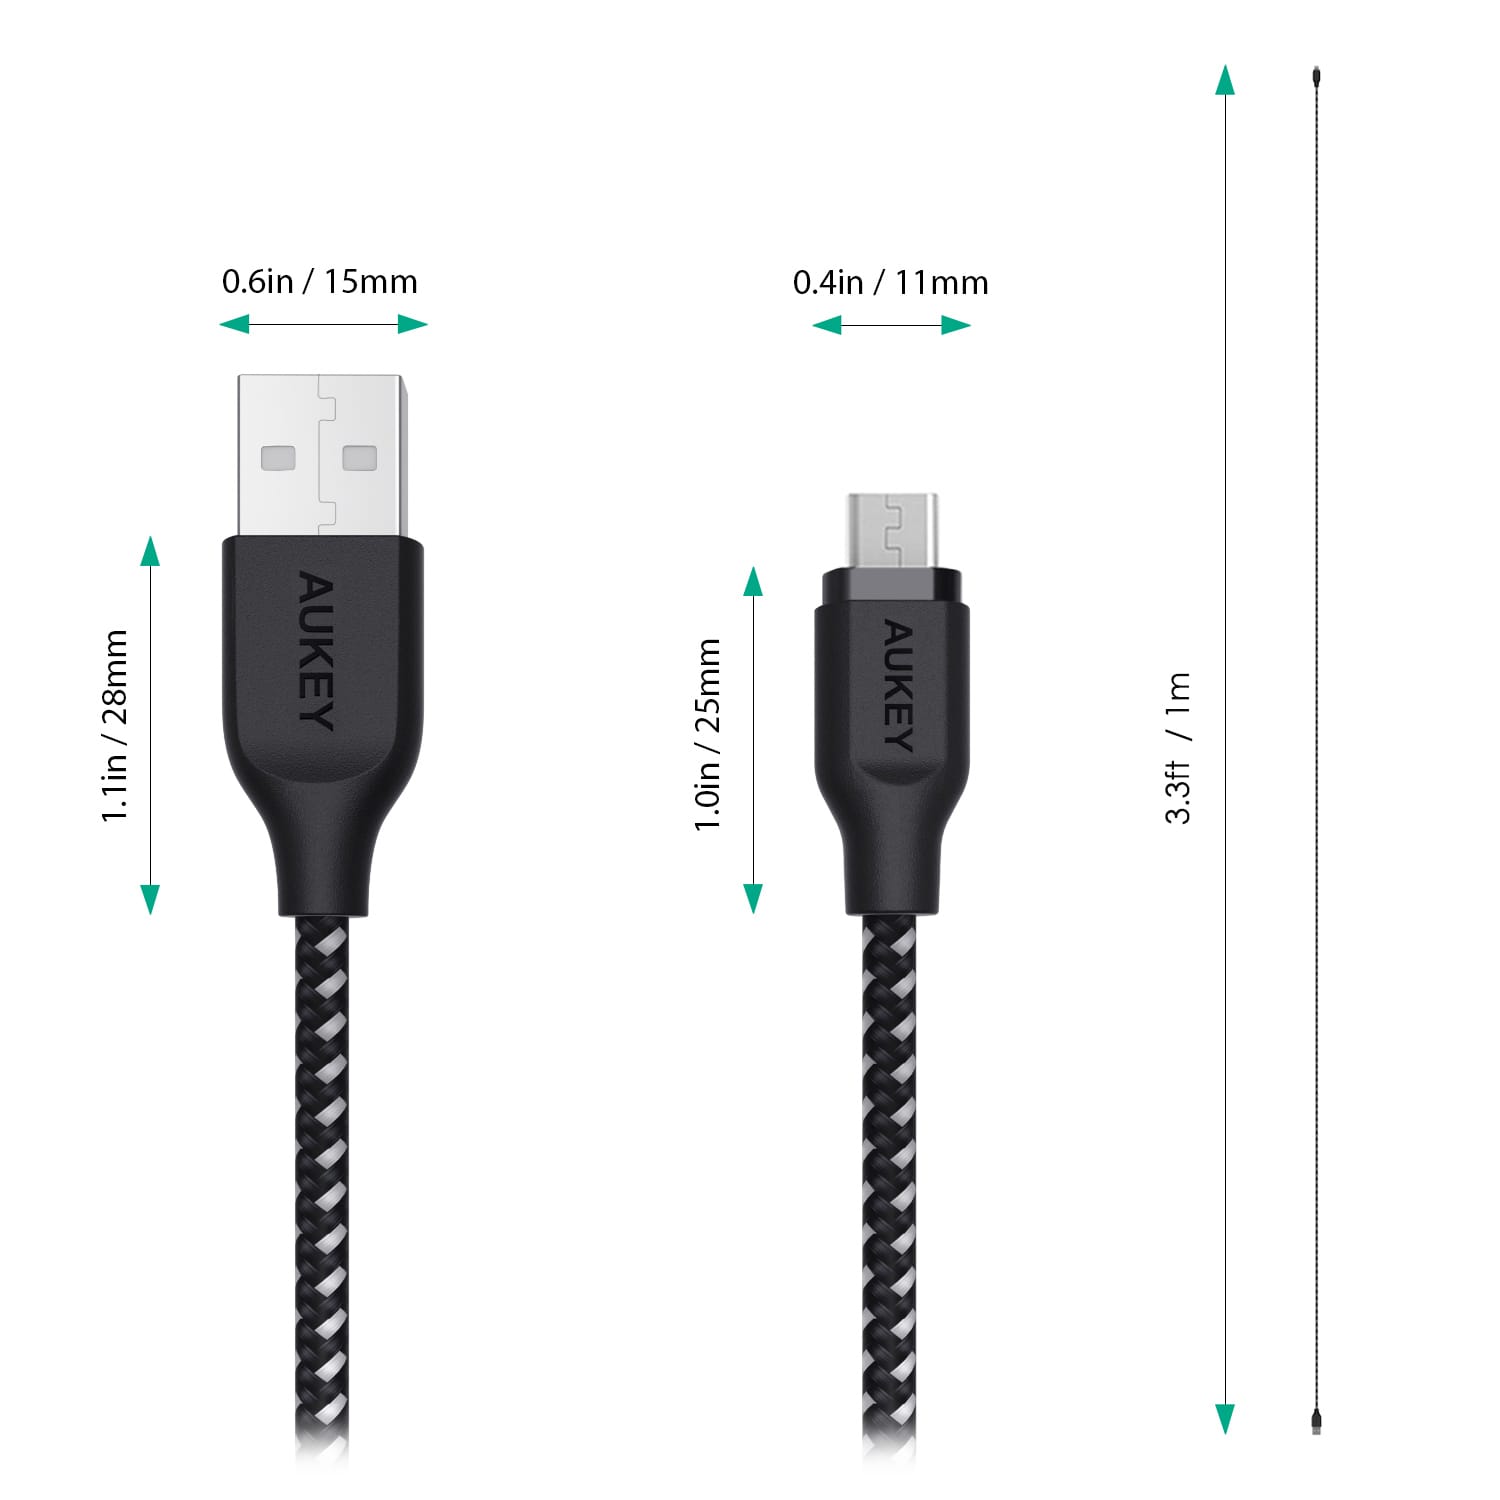 AUKEY CB-AM1 High Performance Nylon Micro USB Cable 1.2 meter - Aukey Malaysia Official Store